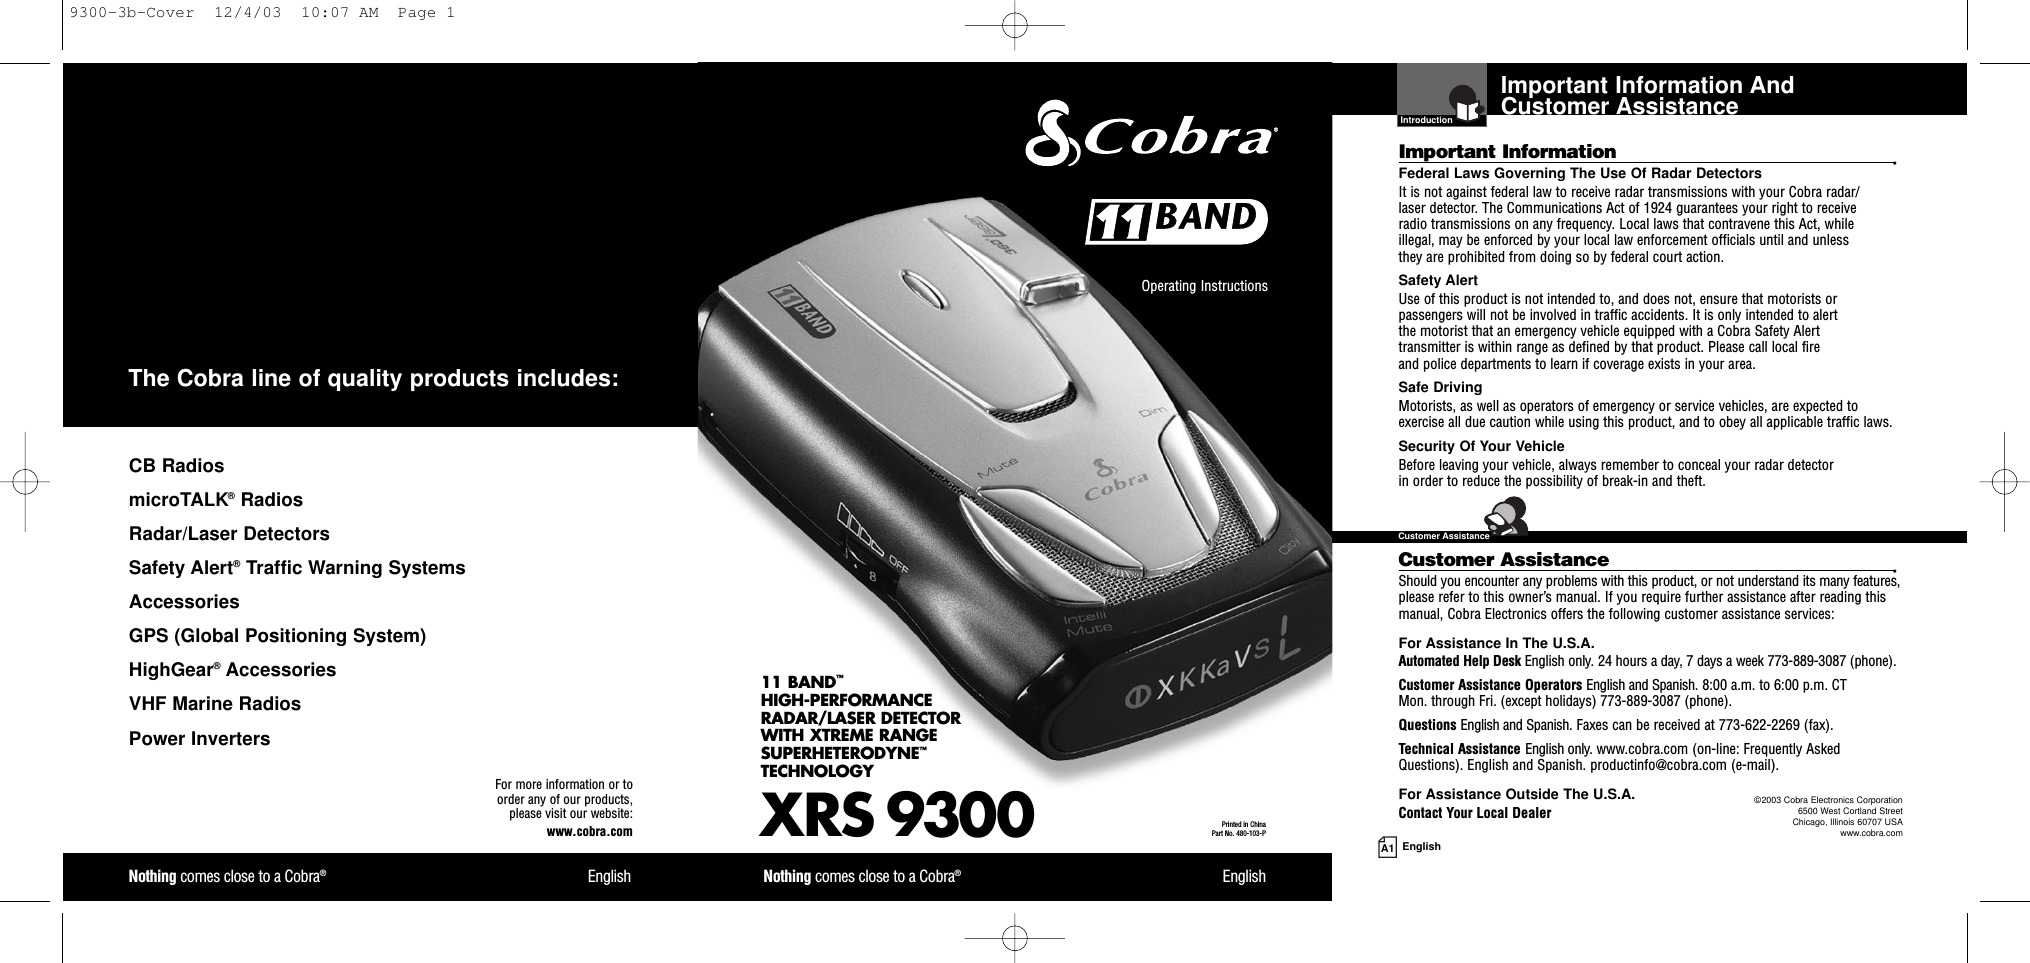 Important Information And Customer AssistanceIntroductionA1 EnglishImportant Information •Federal Laws Governing The Use Of Radar Detectors It is not against federal law to receive radar transmissions with your Cobra radar/laser detector. The Communications Act of 1924 guarantees your right to receive radio transmissions on any frequency. Local laws that contravene this Act, while illegal, may be enforced by your local law enforcement officials until and unless they are prohibited from doing so by federal court action.Safety AlertUse of this product is not intended to, and does not, ensure that motorists orpassengers will not be involved in traffic accidents. It is only intended to alert the motorist that an emergency vehicle equipped with a Cobra Safety Alert transmitter is within range as defined by that product. Please call local fire and police departments to learn if coverage exists in your area.Safe Driving Motorists, as well as operators of emergency or service vehicles, are expected toexercise all due caution while using this product, and to obey all applicable traffic laws.Security Of Your Vehicle Before leaving your vehicle, always remember to conceal your radar detector in order to reduce the possibility of break-in and theft.Customer Assistance •Should you encounter any problems with this product, or not understand its many features,please refer to this owner’s manual. If you require further assistance after reading thismanual, Cobra Electronics offers the following customer assistance services:For Assistance In The U.S.A. Automated Help Desk English only. 24 hours a day, 7 days a week 773-889-3087 (phone).Customer Assistance Operators English and Spanish. 8:00 a.m. to 6:00 p.m. CT Mon. through Fri. (except holidays) 773-889-3087 (phone).Questions English and Spanish. Faxes can be received at 773-622-2269 (fax).Technical Assistance English only. www.cobra.com (on-line: Frequently AskedQuestions). English and Spanish. productinfo@cobra.com (e-mail).For Assistance Outside The U.S.A. Contact Your Local DealerXRS 930011 BAND™HIGH-PERFORMANCE RADAR/LASER DETECTOR WITH XTREME RANGE SUPERHETERODYNE™TECHNOLOGYNothing comes close to a Cobra®EnglishNothing comes close to a Cobra®EnglishOperating Instructions Printed in China Part No. 480-103-PFor more information or to order any of our products, please visit our website:www.cobra.com©2003 Cobra Electronics Corporation6500 West Cortland StreetChicago, Illinois 60707 USAwww.cobra.comCB RadiosmicroTALK®RadiosRadar/Laser Detectors Safety Alert®Traffic Warning SystemsAccessories GPS (Global Positioning System)HighGear®Accessories  VHF Marine Radios  Power InvertersThe Cobra line of quality products includes:Customer Assistance9300-3b-Cover  12/4/03  10:07 AM  Page 1